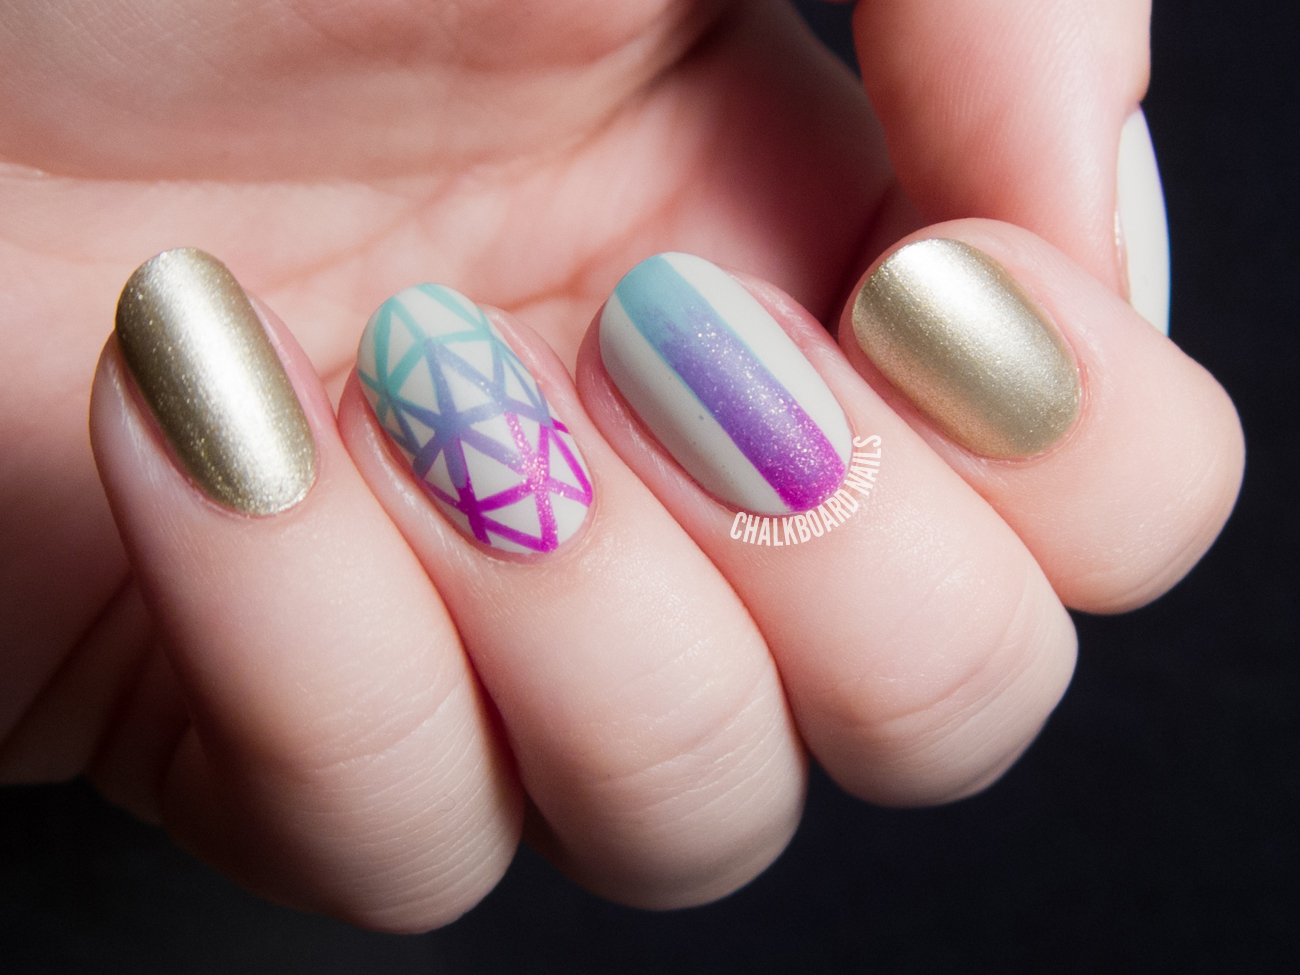 1. How to Create a Gradient Nail Art with a Sponge - wide 8